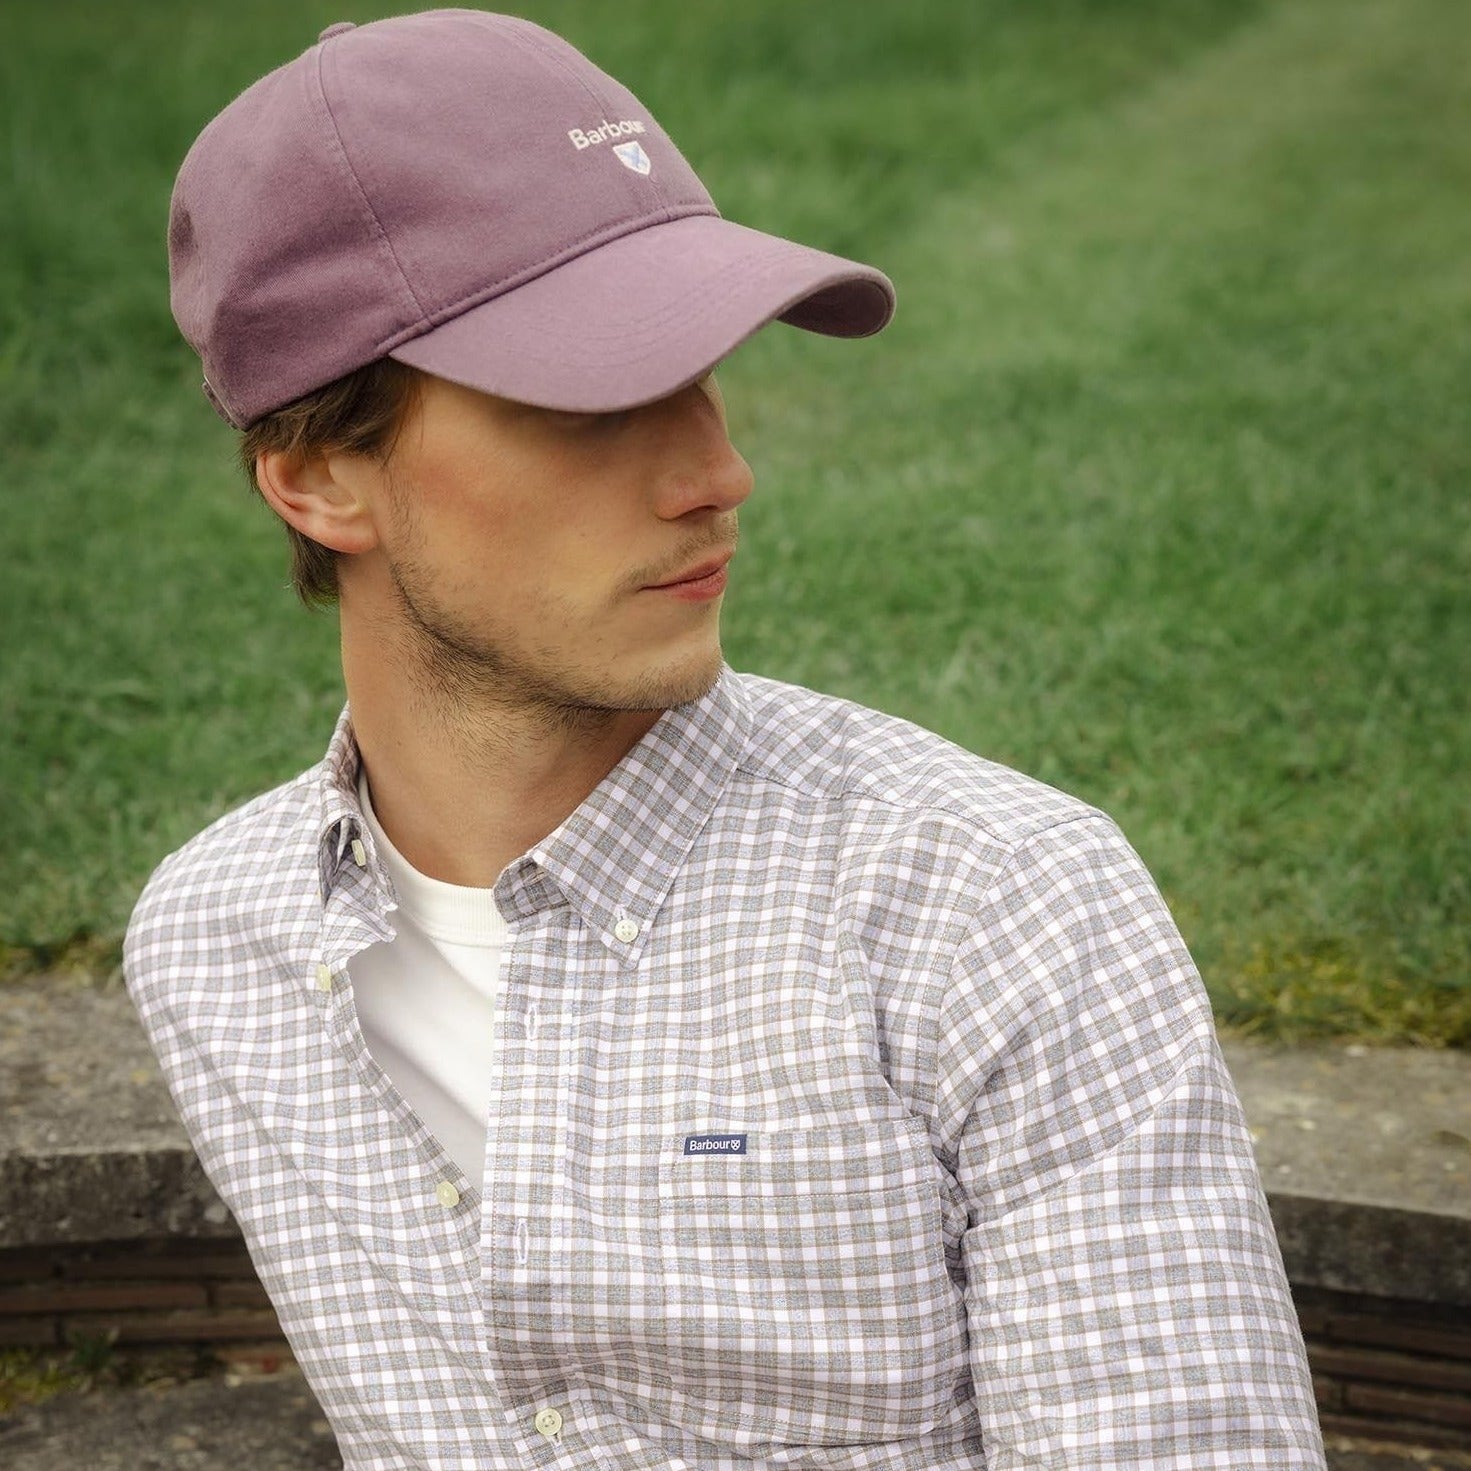 Barbour Cascade Sports Cap in Moonscape